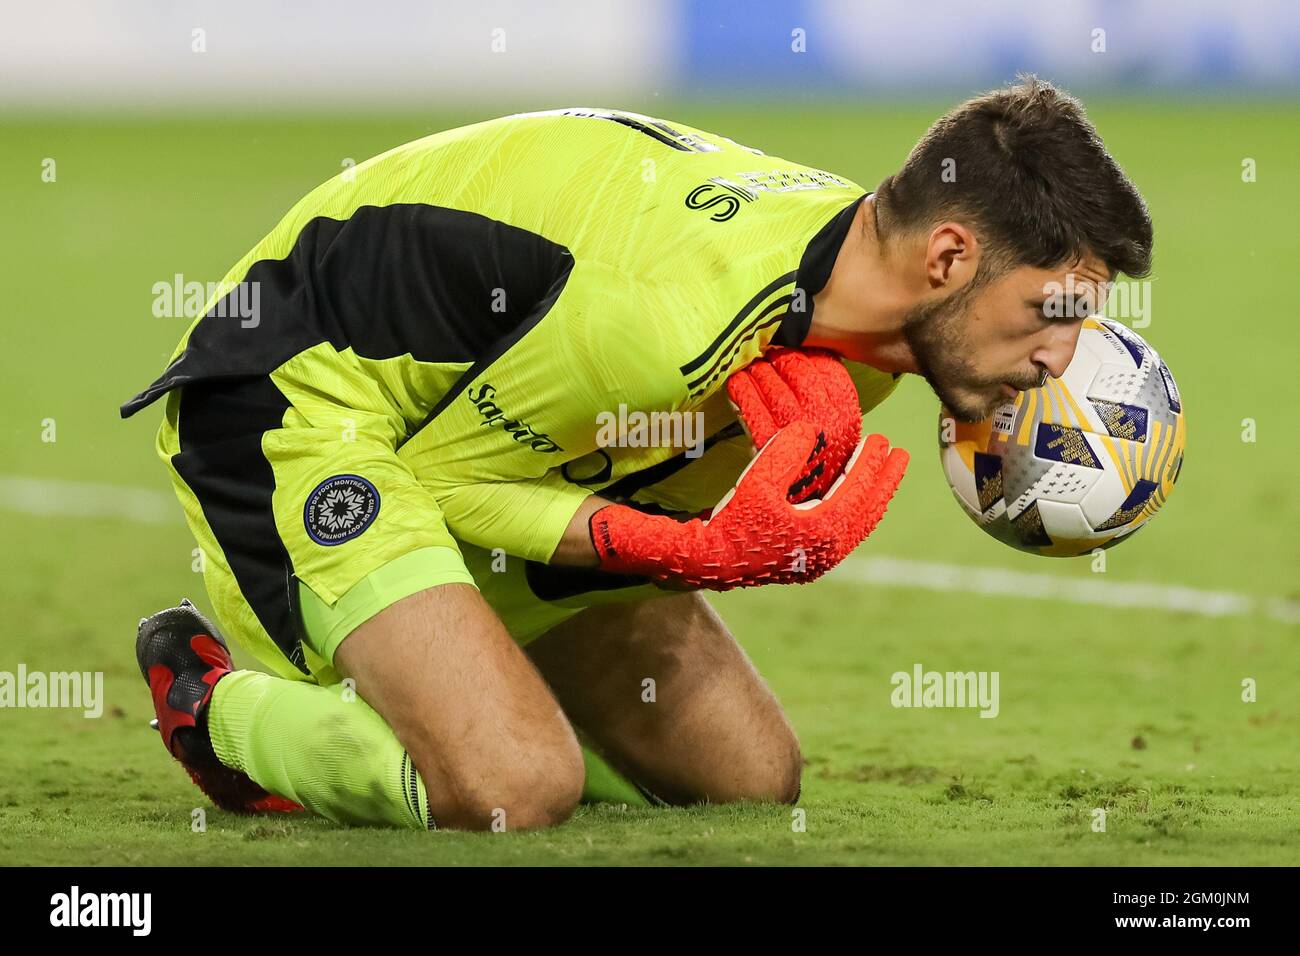 September 15, 2021: CF Montréal goalkeeper JAMES PANTEMIS (41) makes a save during the second half of the Orlando City vs CF Montreal soccer match at Exploria Stadium in Orlando, FL on September 15, 2021. (Credit Image: © Cory Knowlton/ZUMA Press Wire) Stock Photo